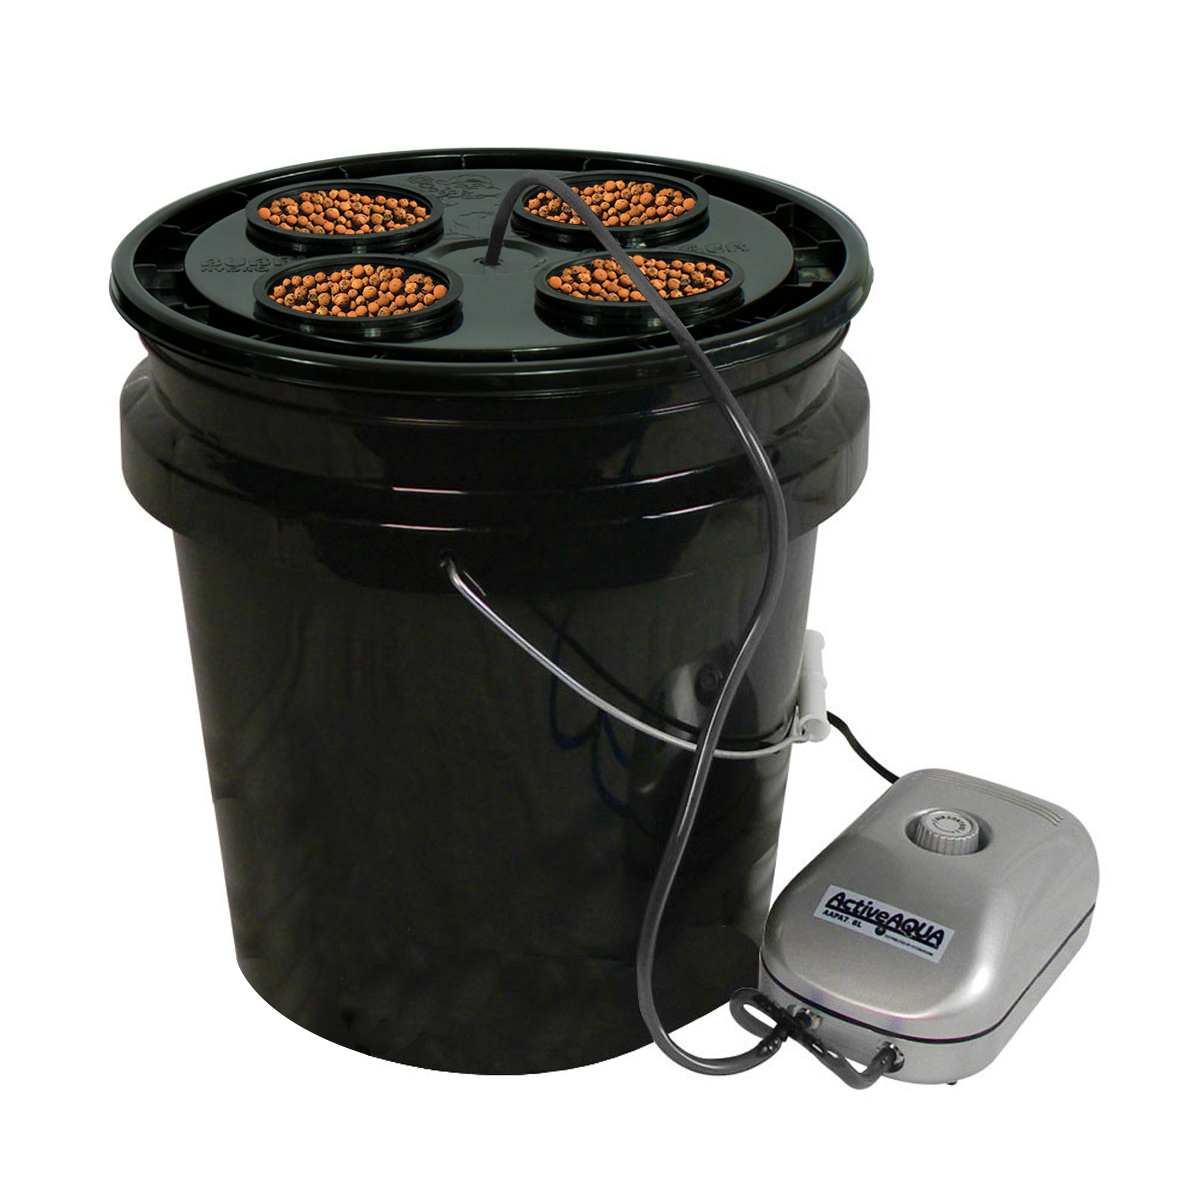 CVault Twist Containers  HTG Supply Hydroponics & Grow Lights